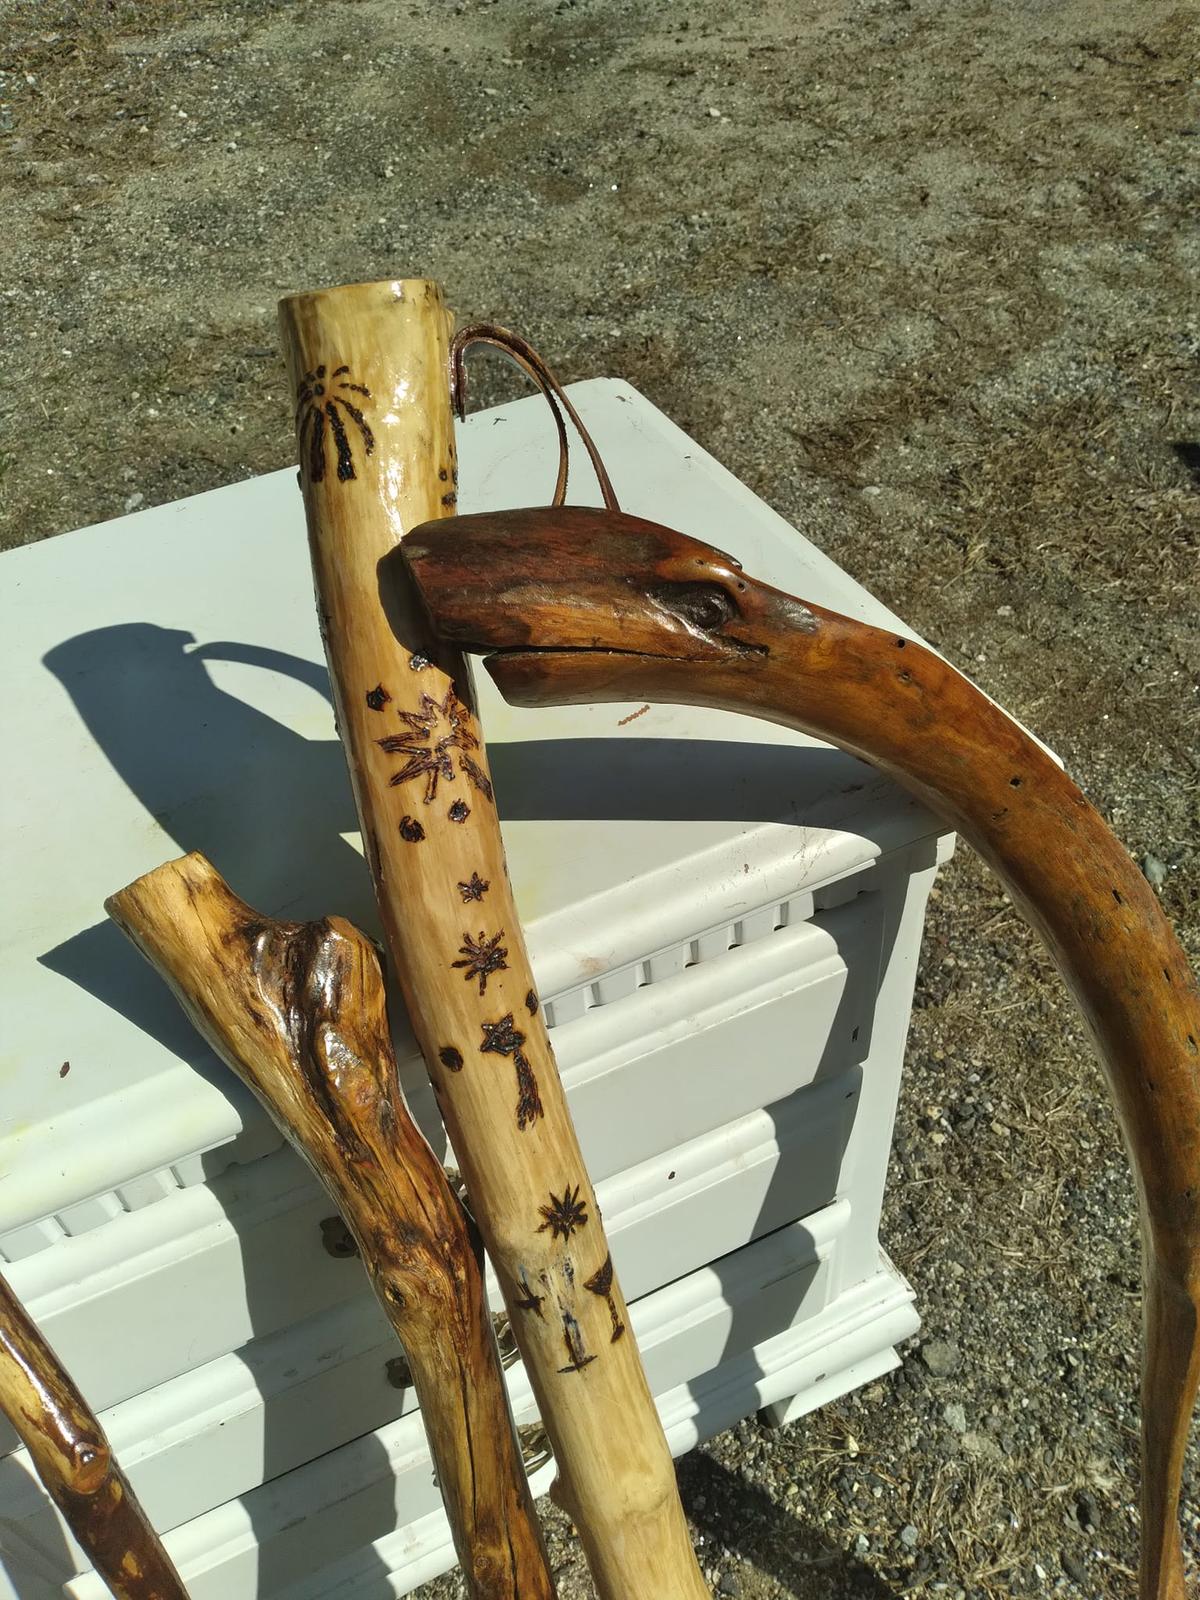 The handcrafted canes displayed in their backyard shop. (Courtesy of Trevor Michaud)